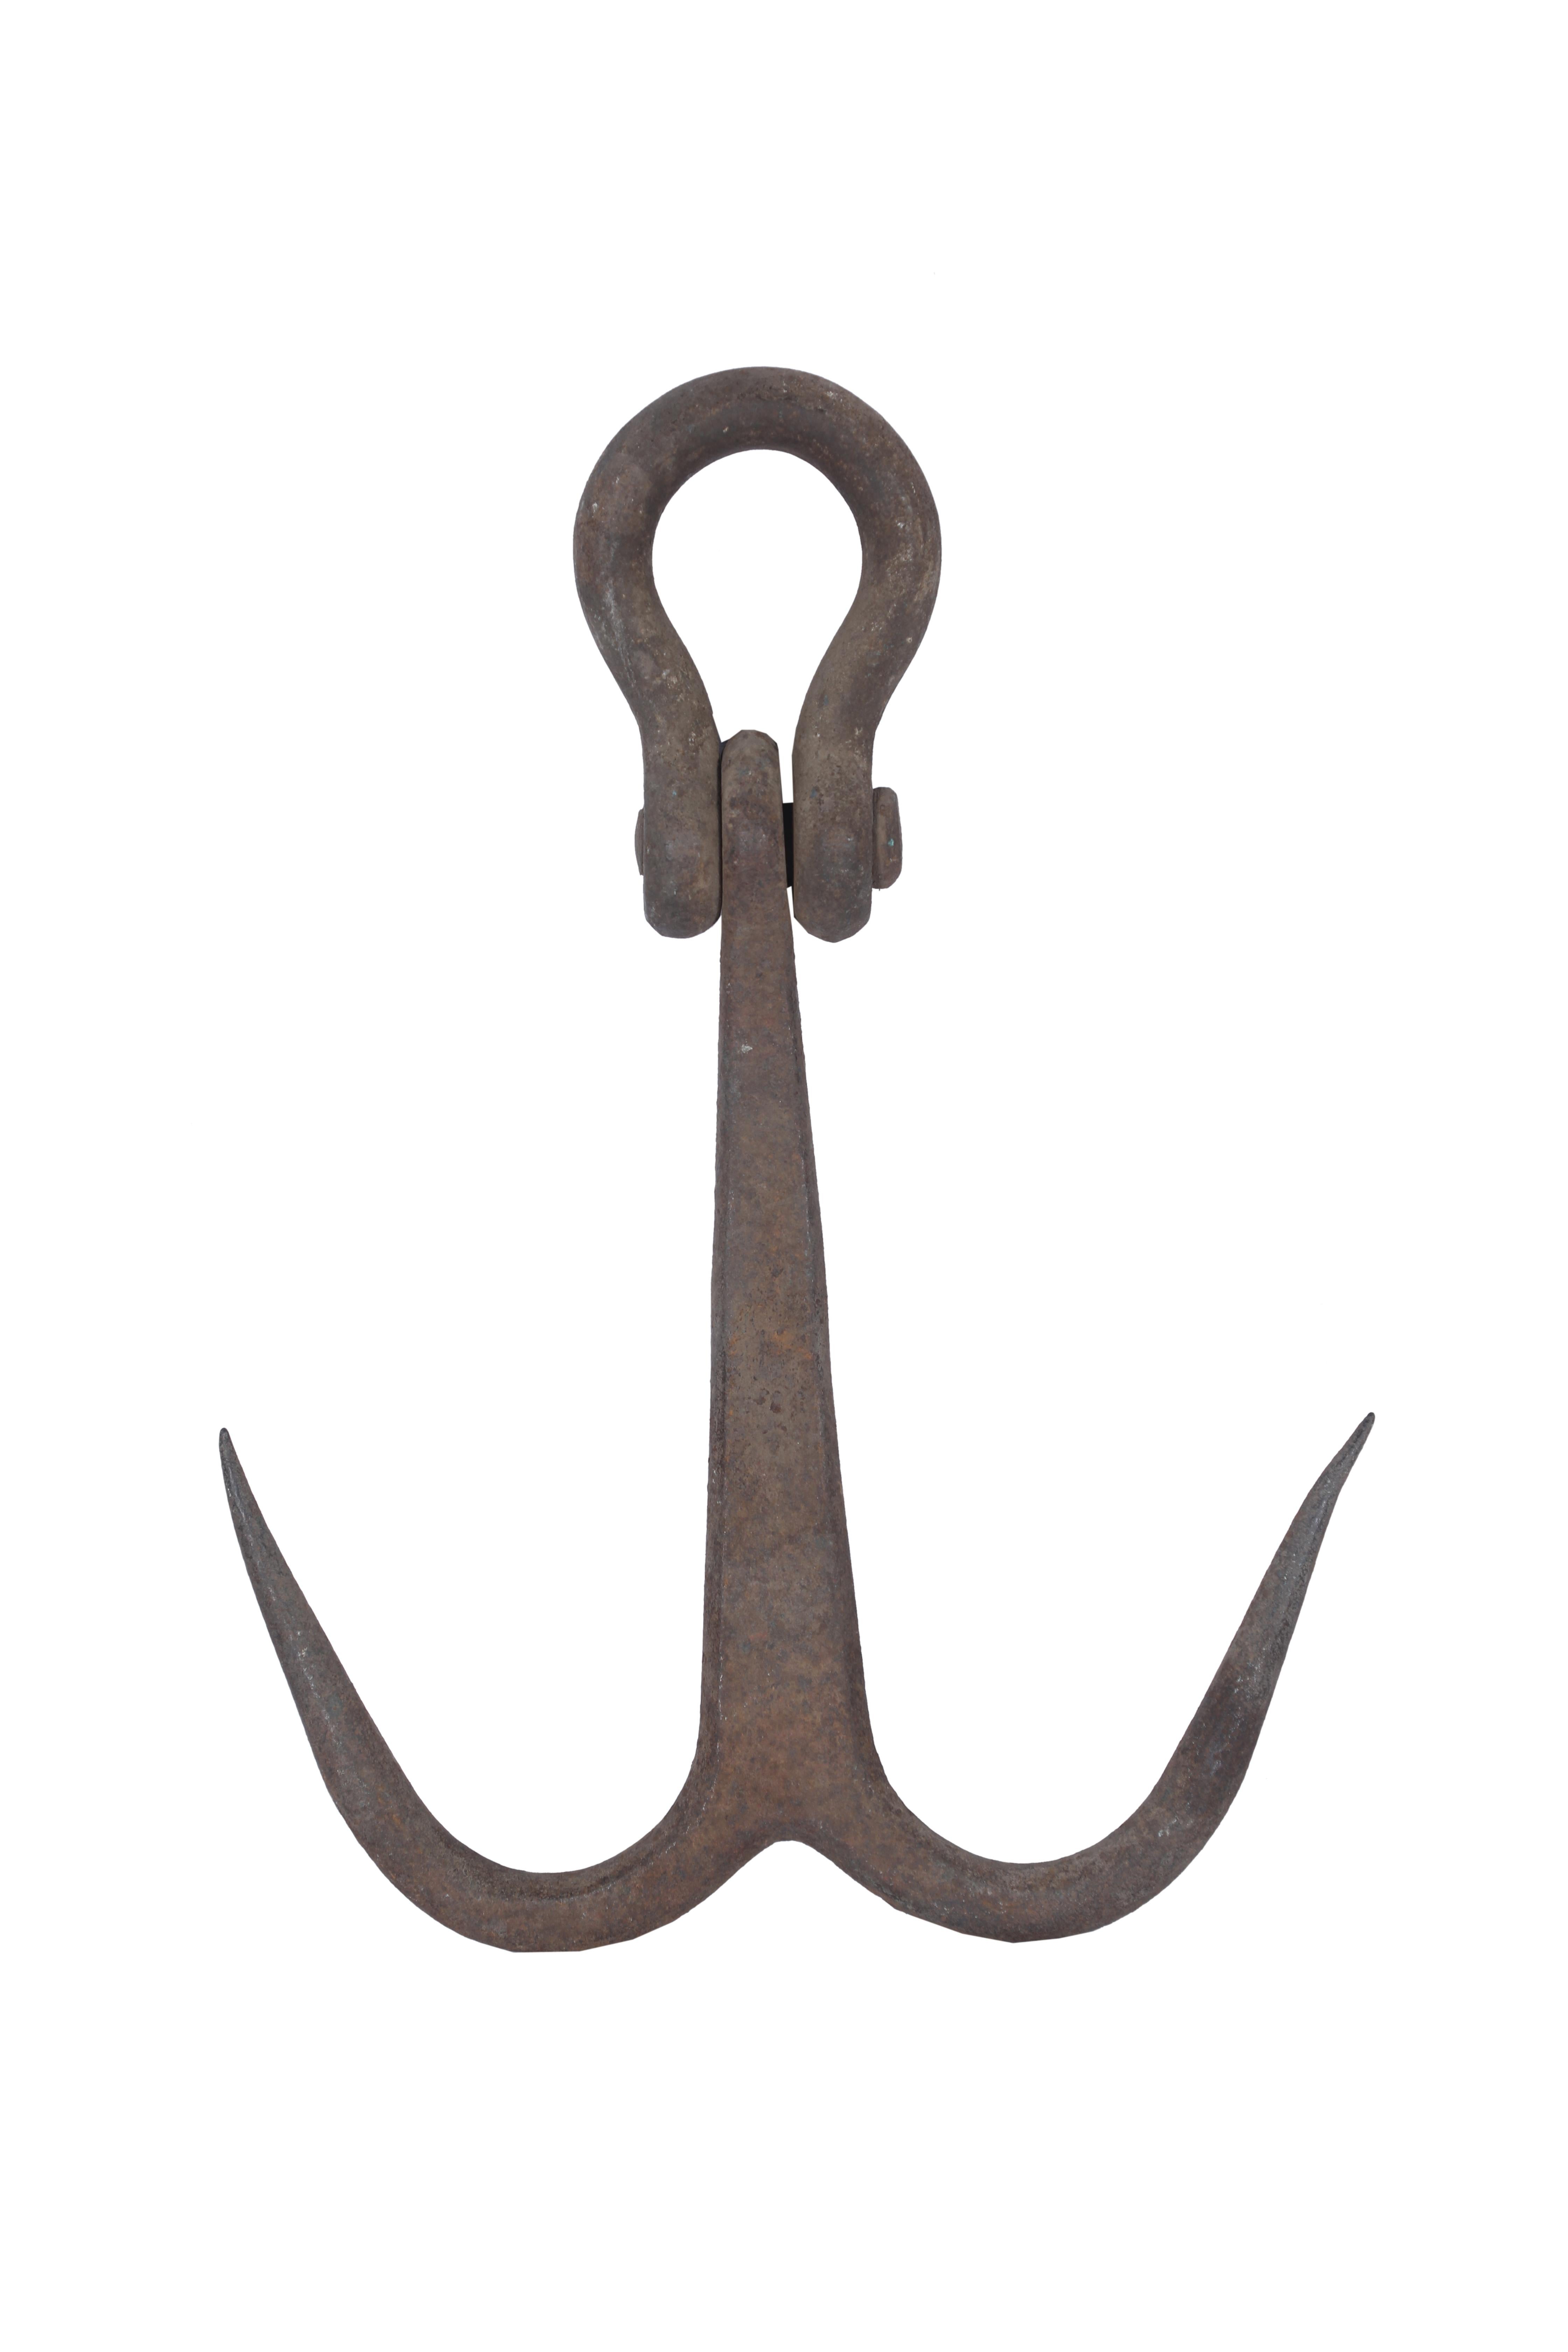 Industrial Two Iron Anchors as Wall Sculptures, 1950's For Sale